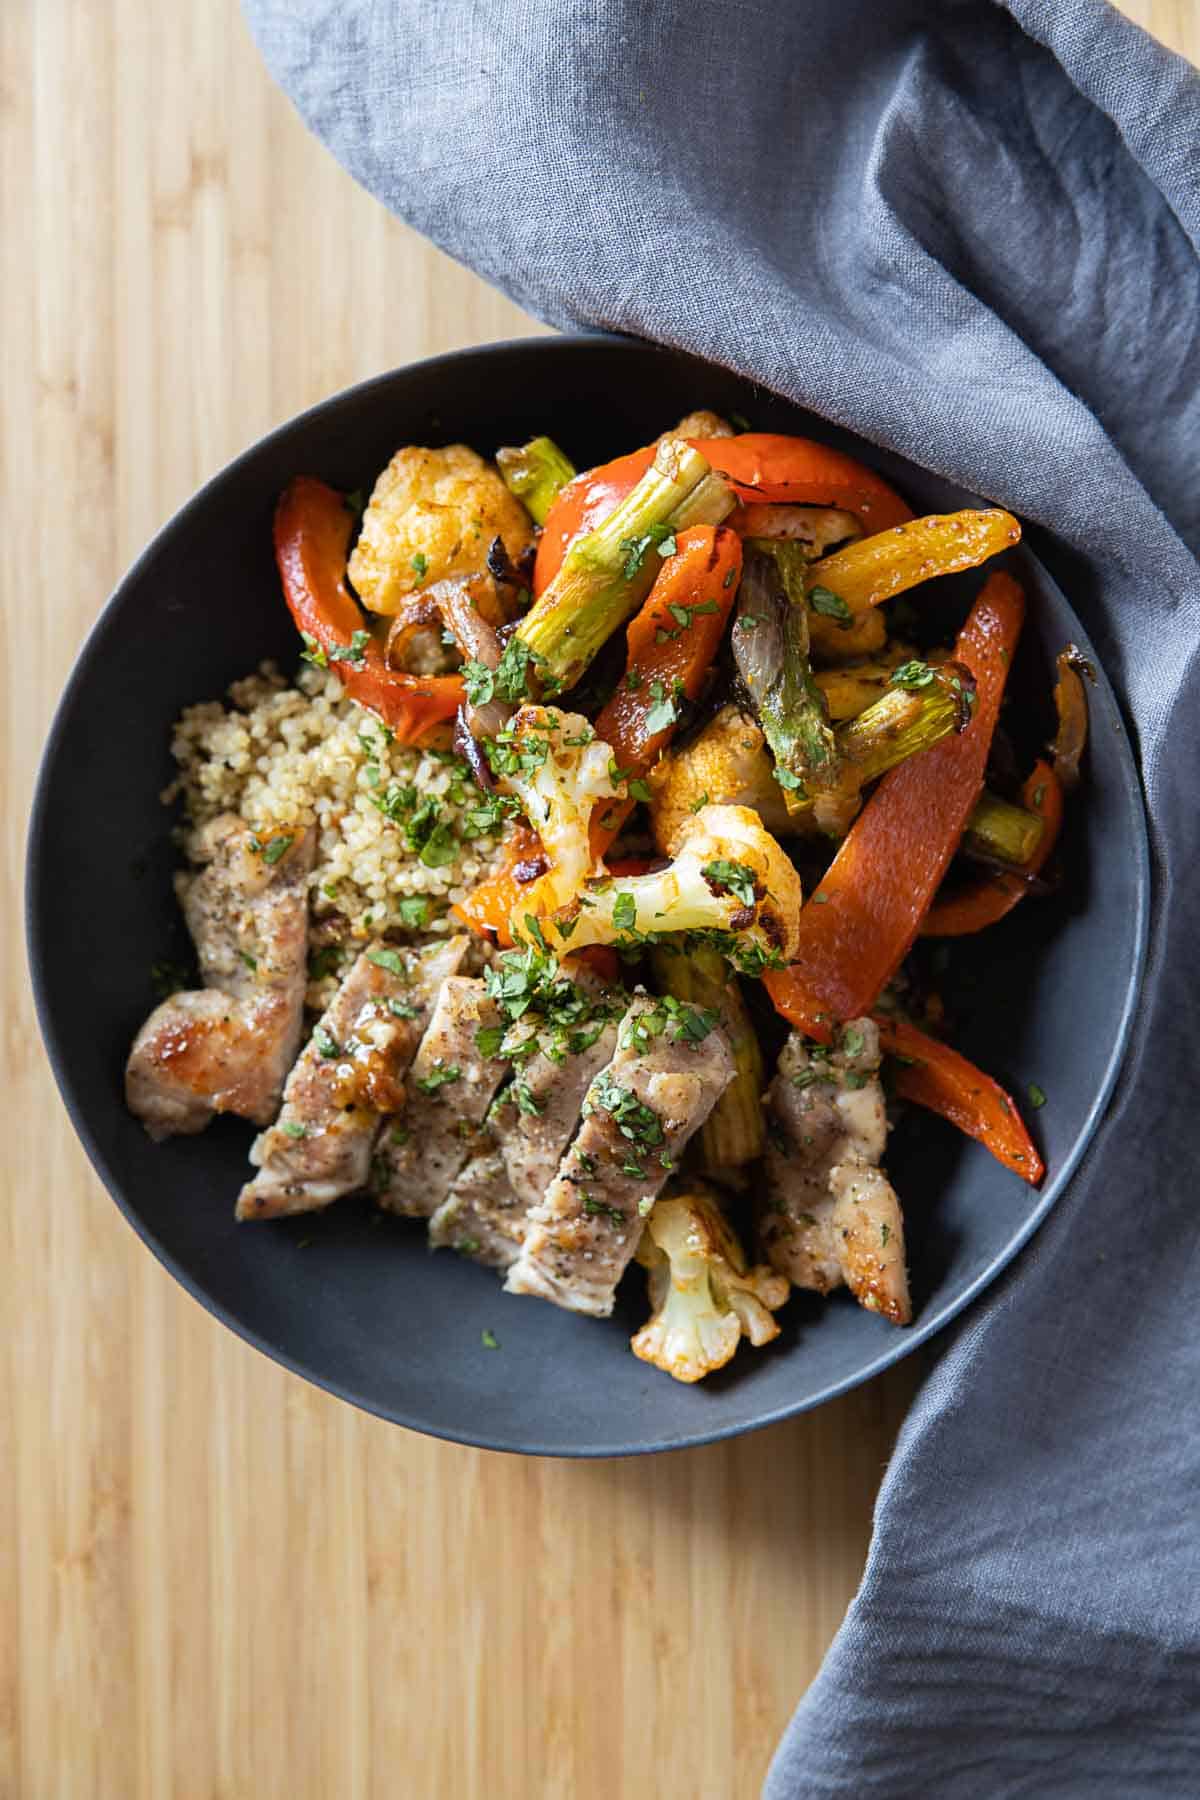 Roasted vegetables, chicken, and quinoa in a grey bowl.